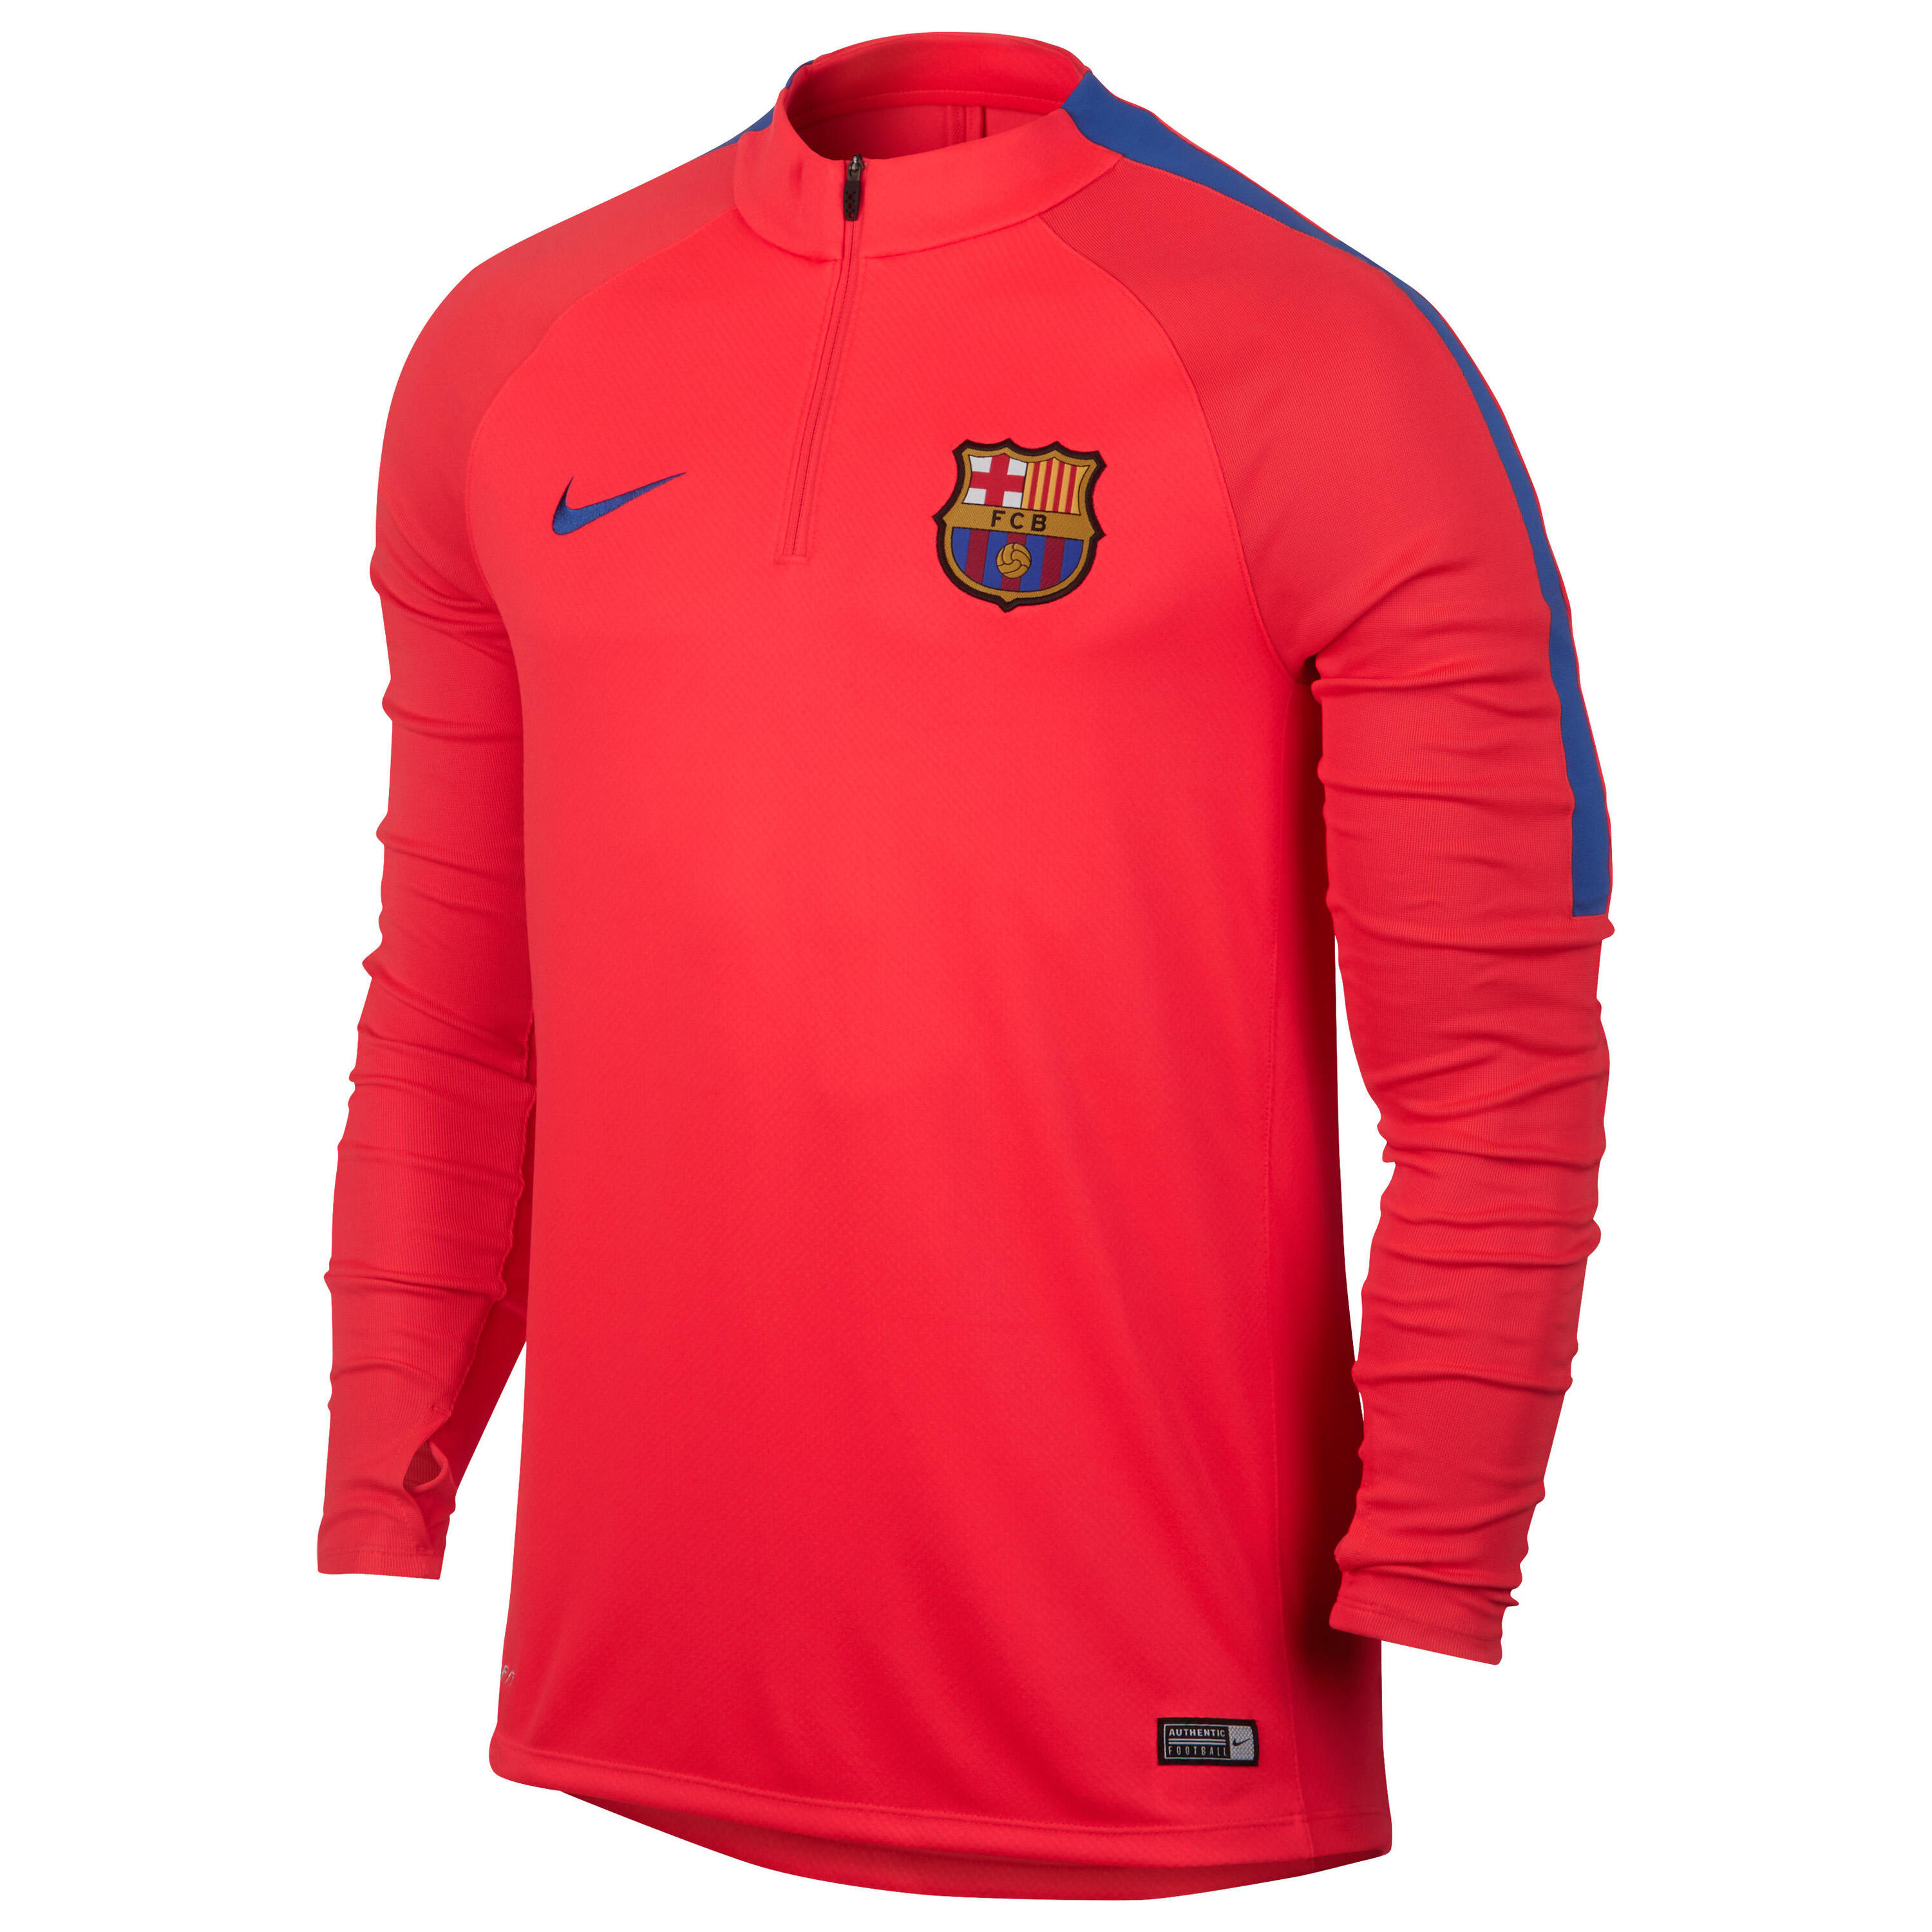 NIKE Barcelona FC Adult Football Training Top - Red